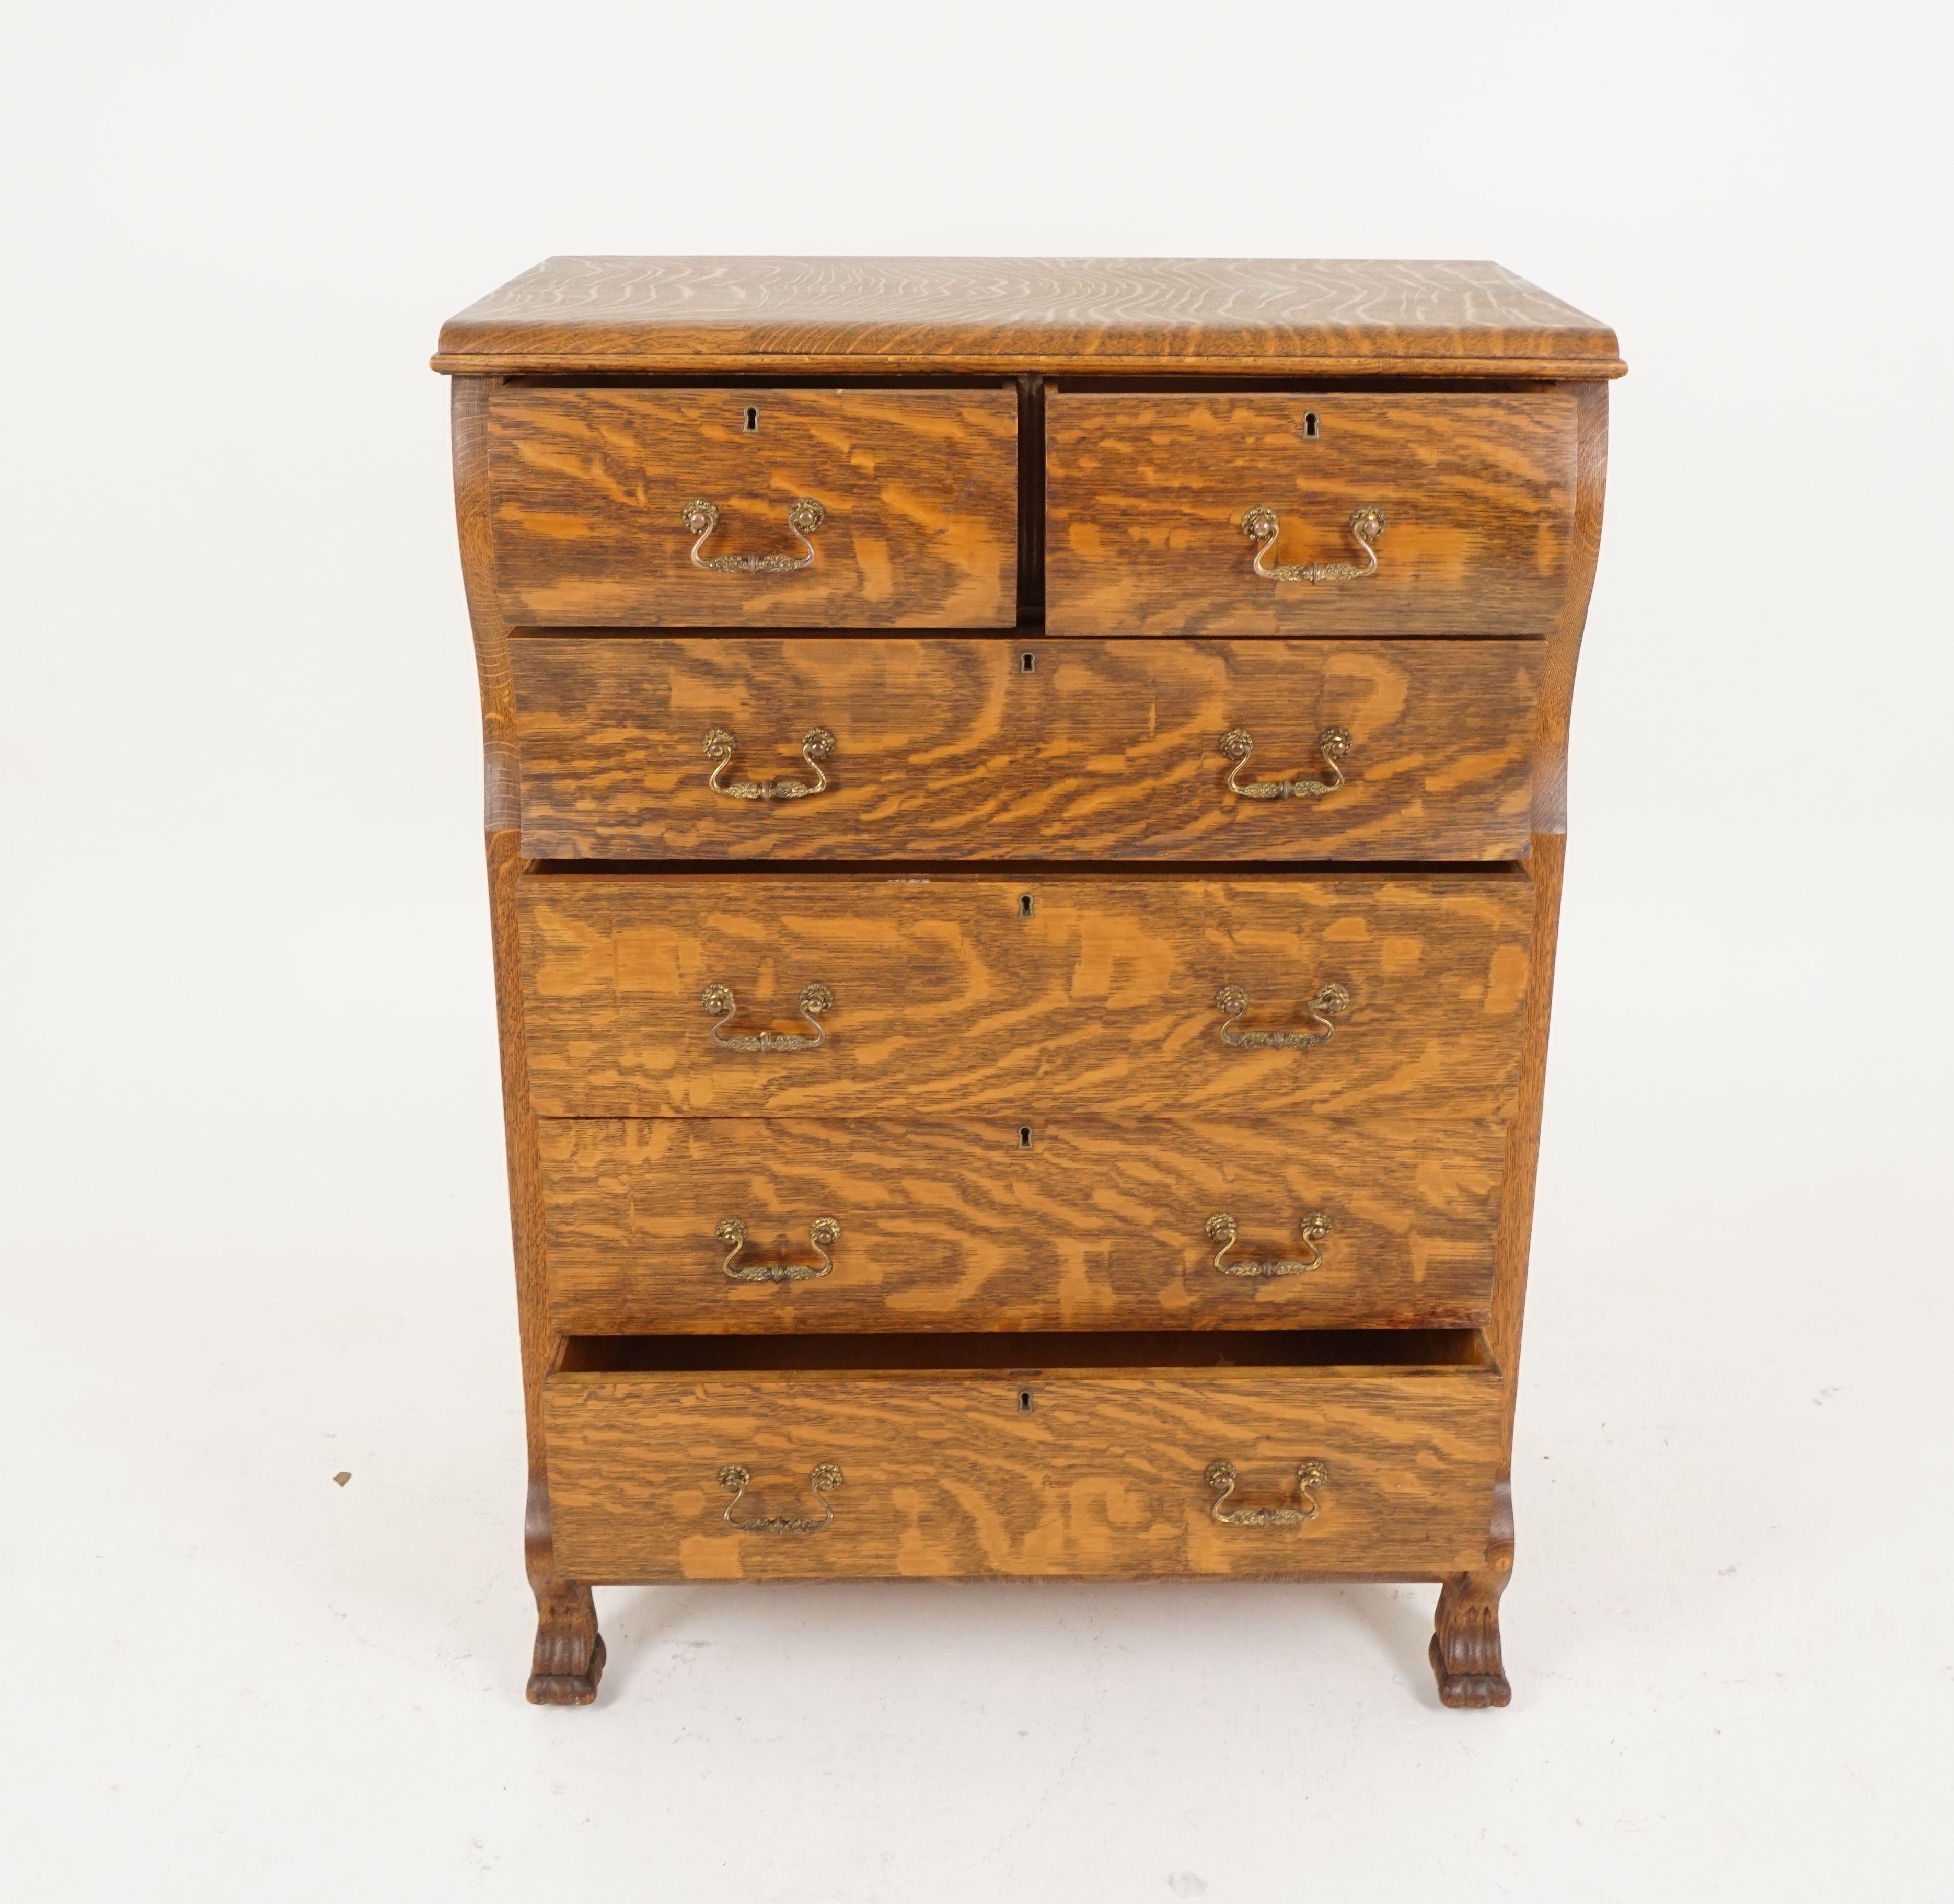 Antique tiger oak high boy dresser, chest of drawers, America 1900, B2287

America, 1900
Solid tiger oak
Original finish
Tiger oak top
Pair of bow front drawers
One long inverted drawer
A further three long drawers
All original brass